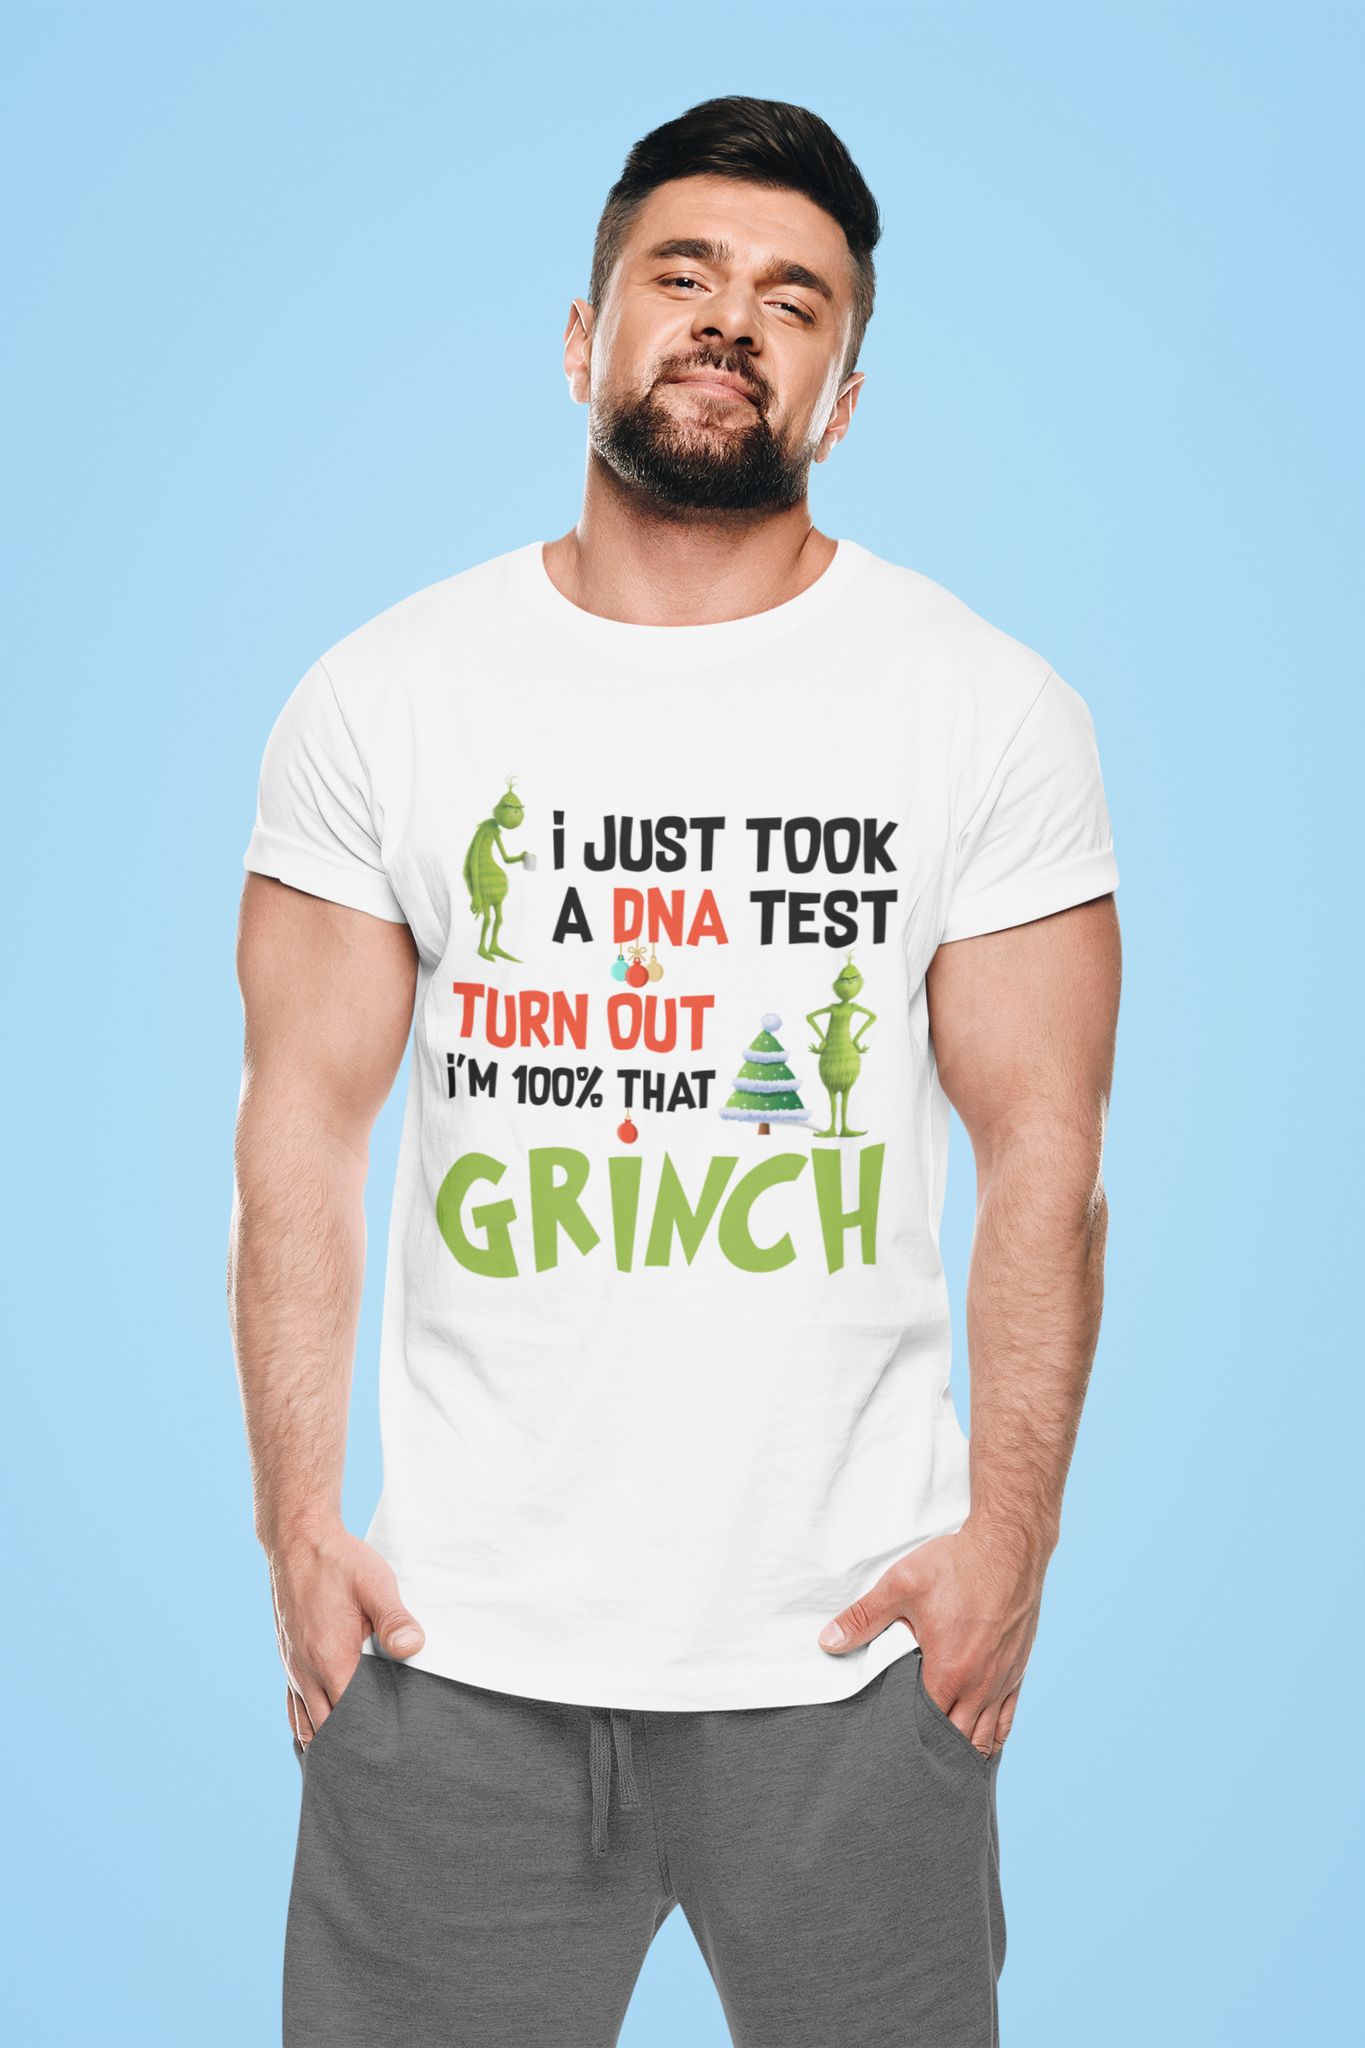 Grinch Tshirt, I Just Took A DNA Test Turn Out Im 100% That Grinch T Shirt, Christmas Gifts